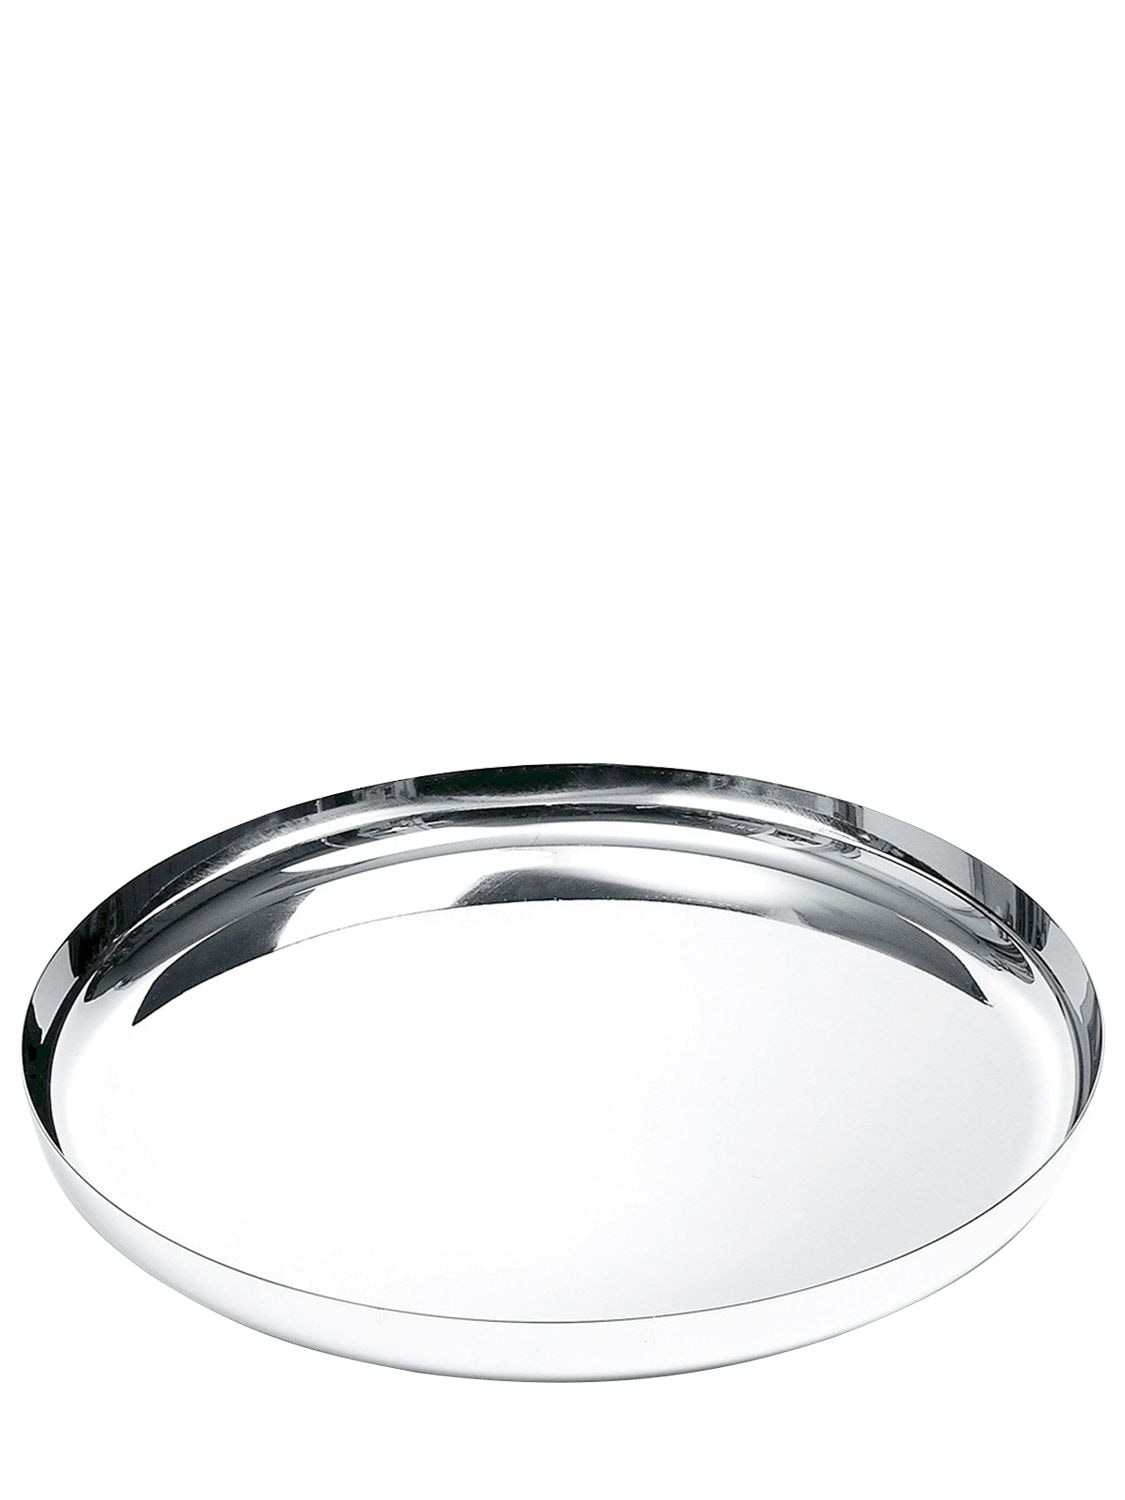 Alessi Round Steel Tray In Silver